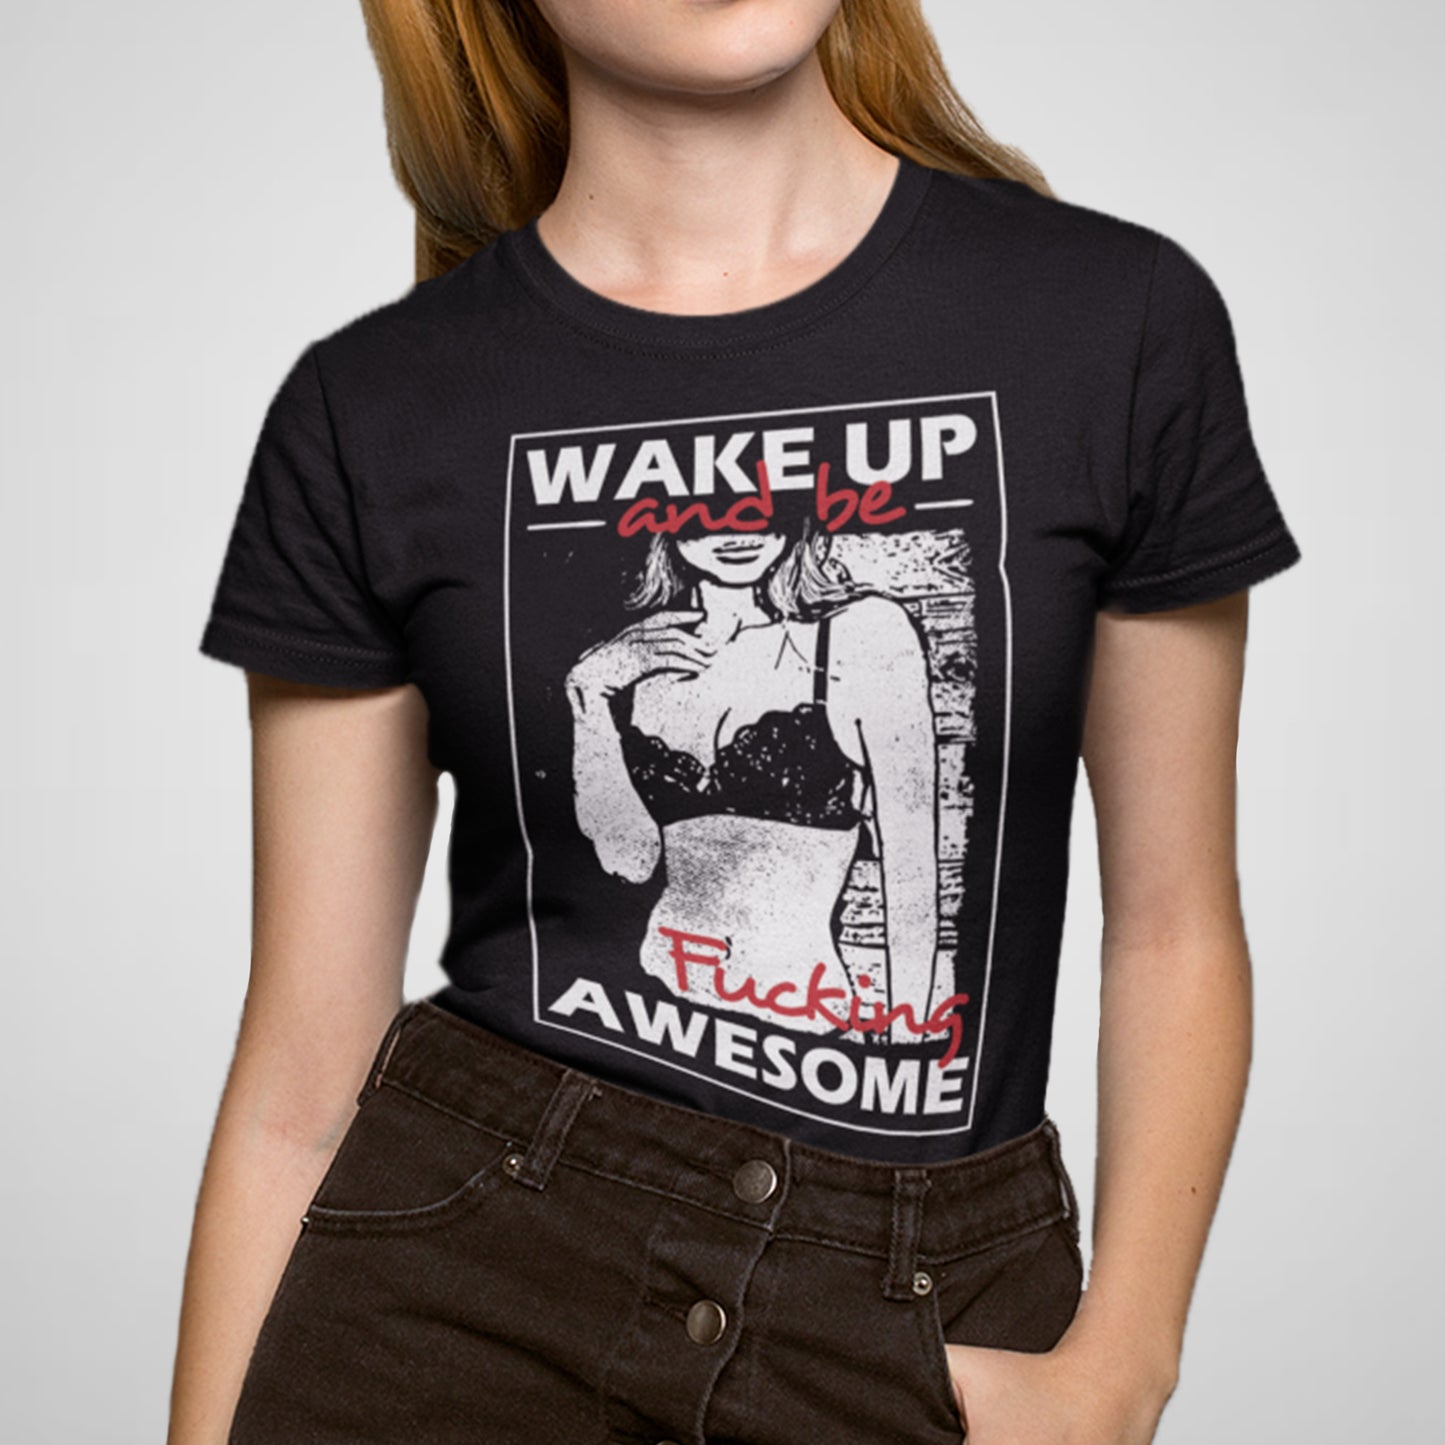 Wake Up & Be Awesome - Women's Relaxed Cotton Tee